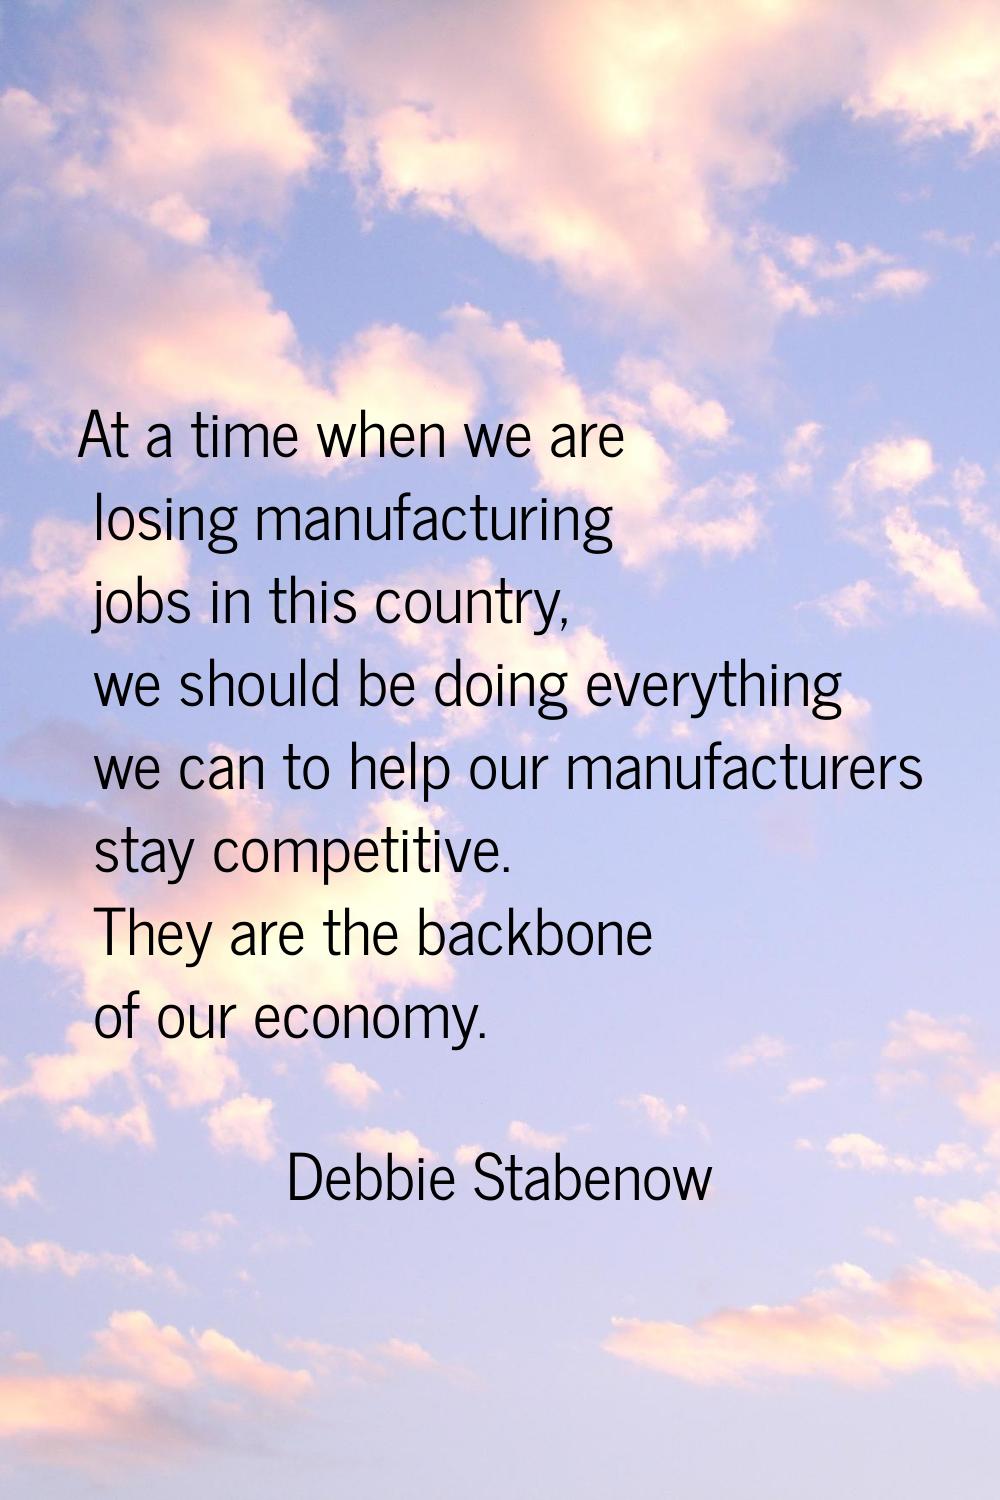 At a time when we are losing manufacturing jobs in this country, we should be doing everything we c